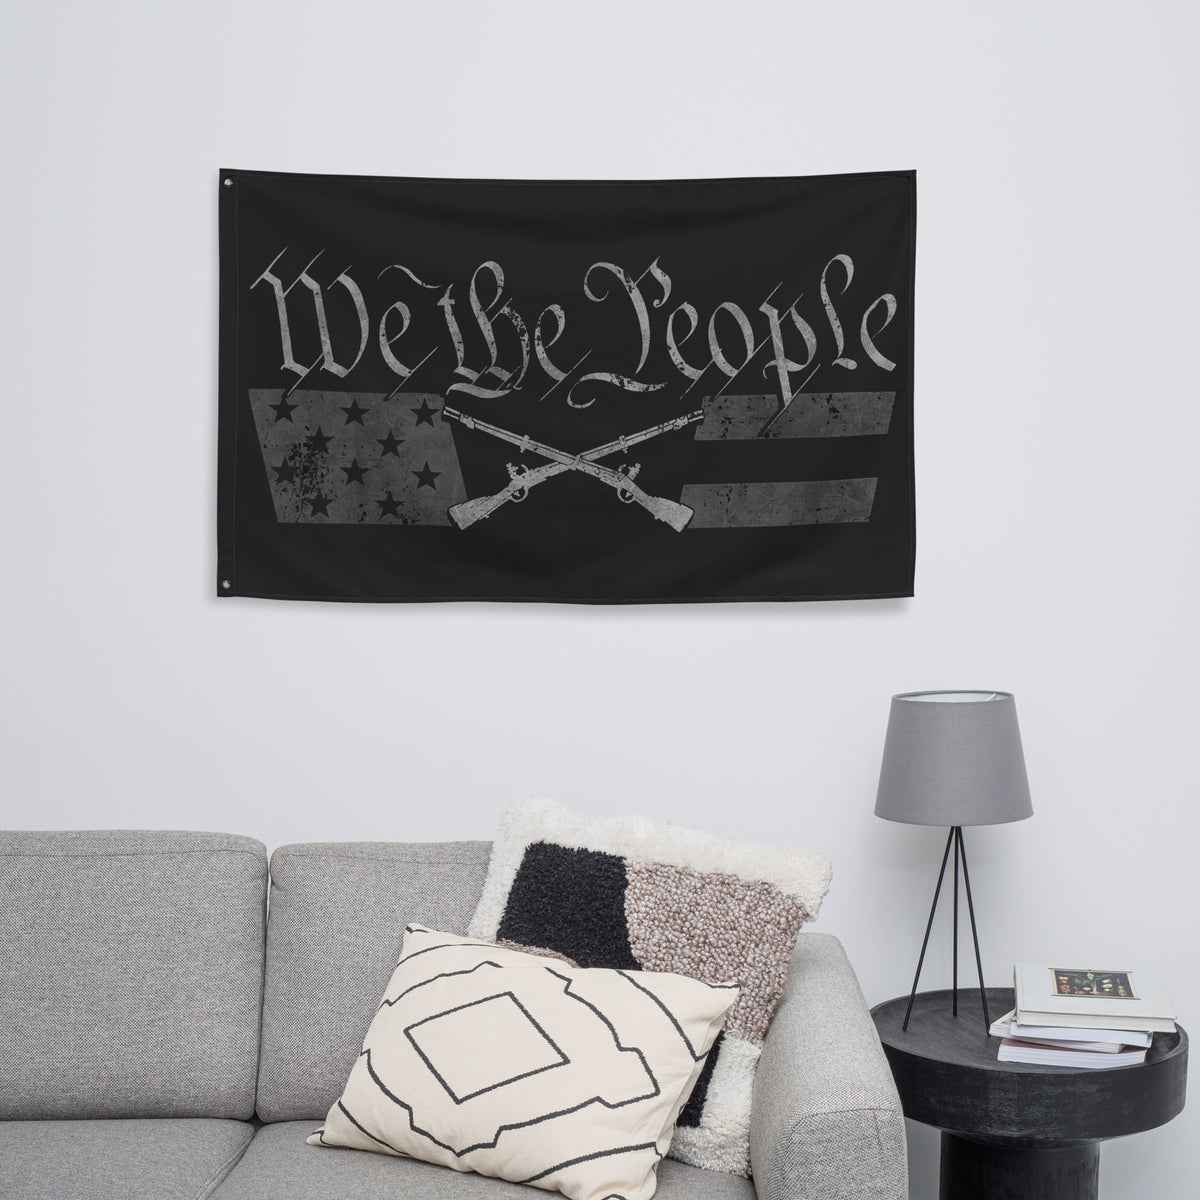 We The People Logo Wall Flag